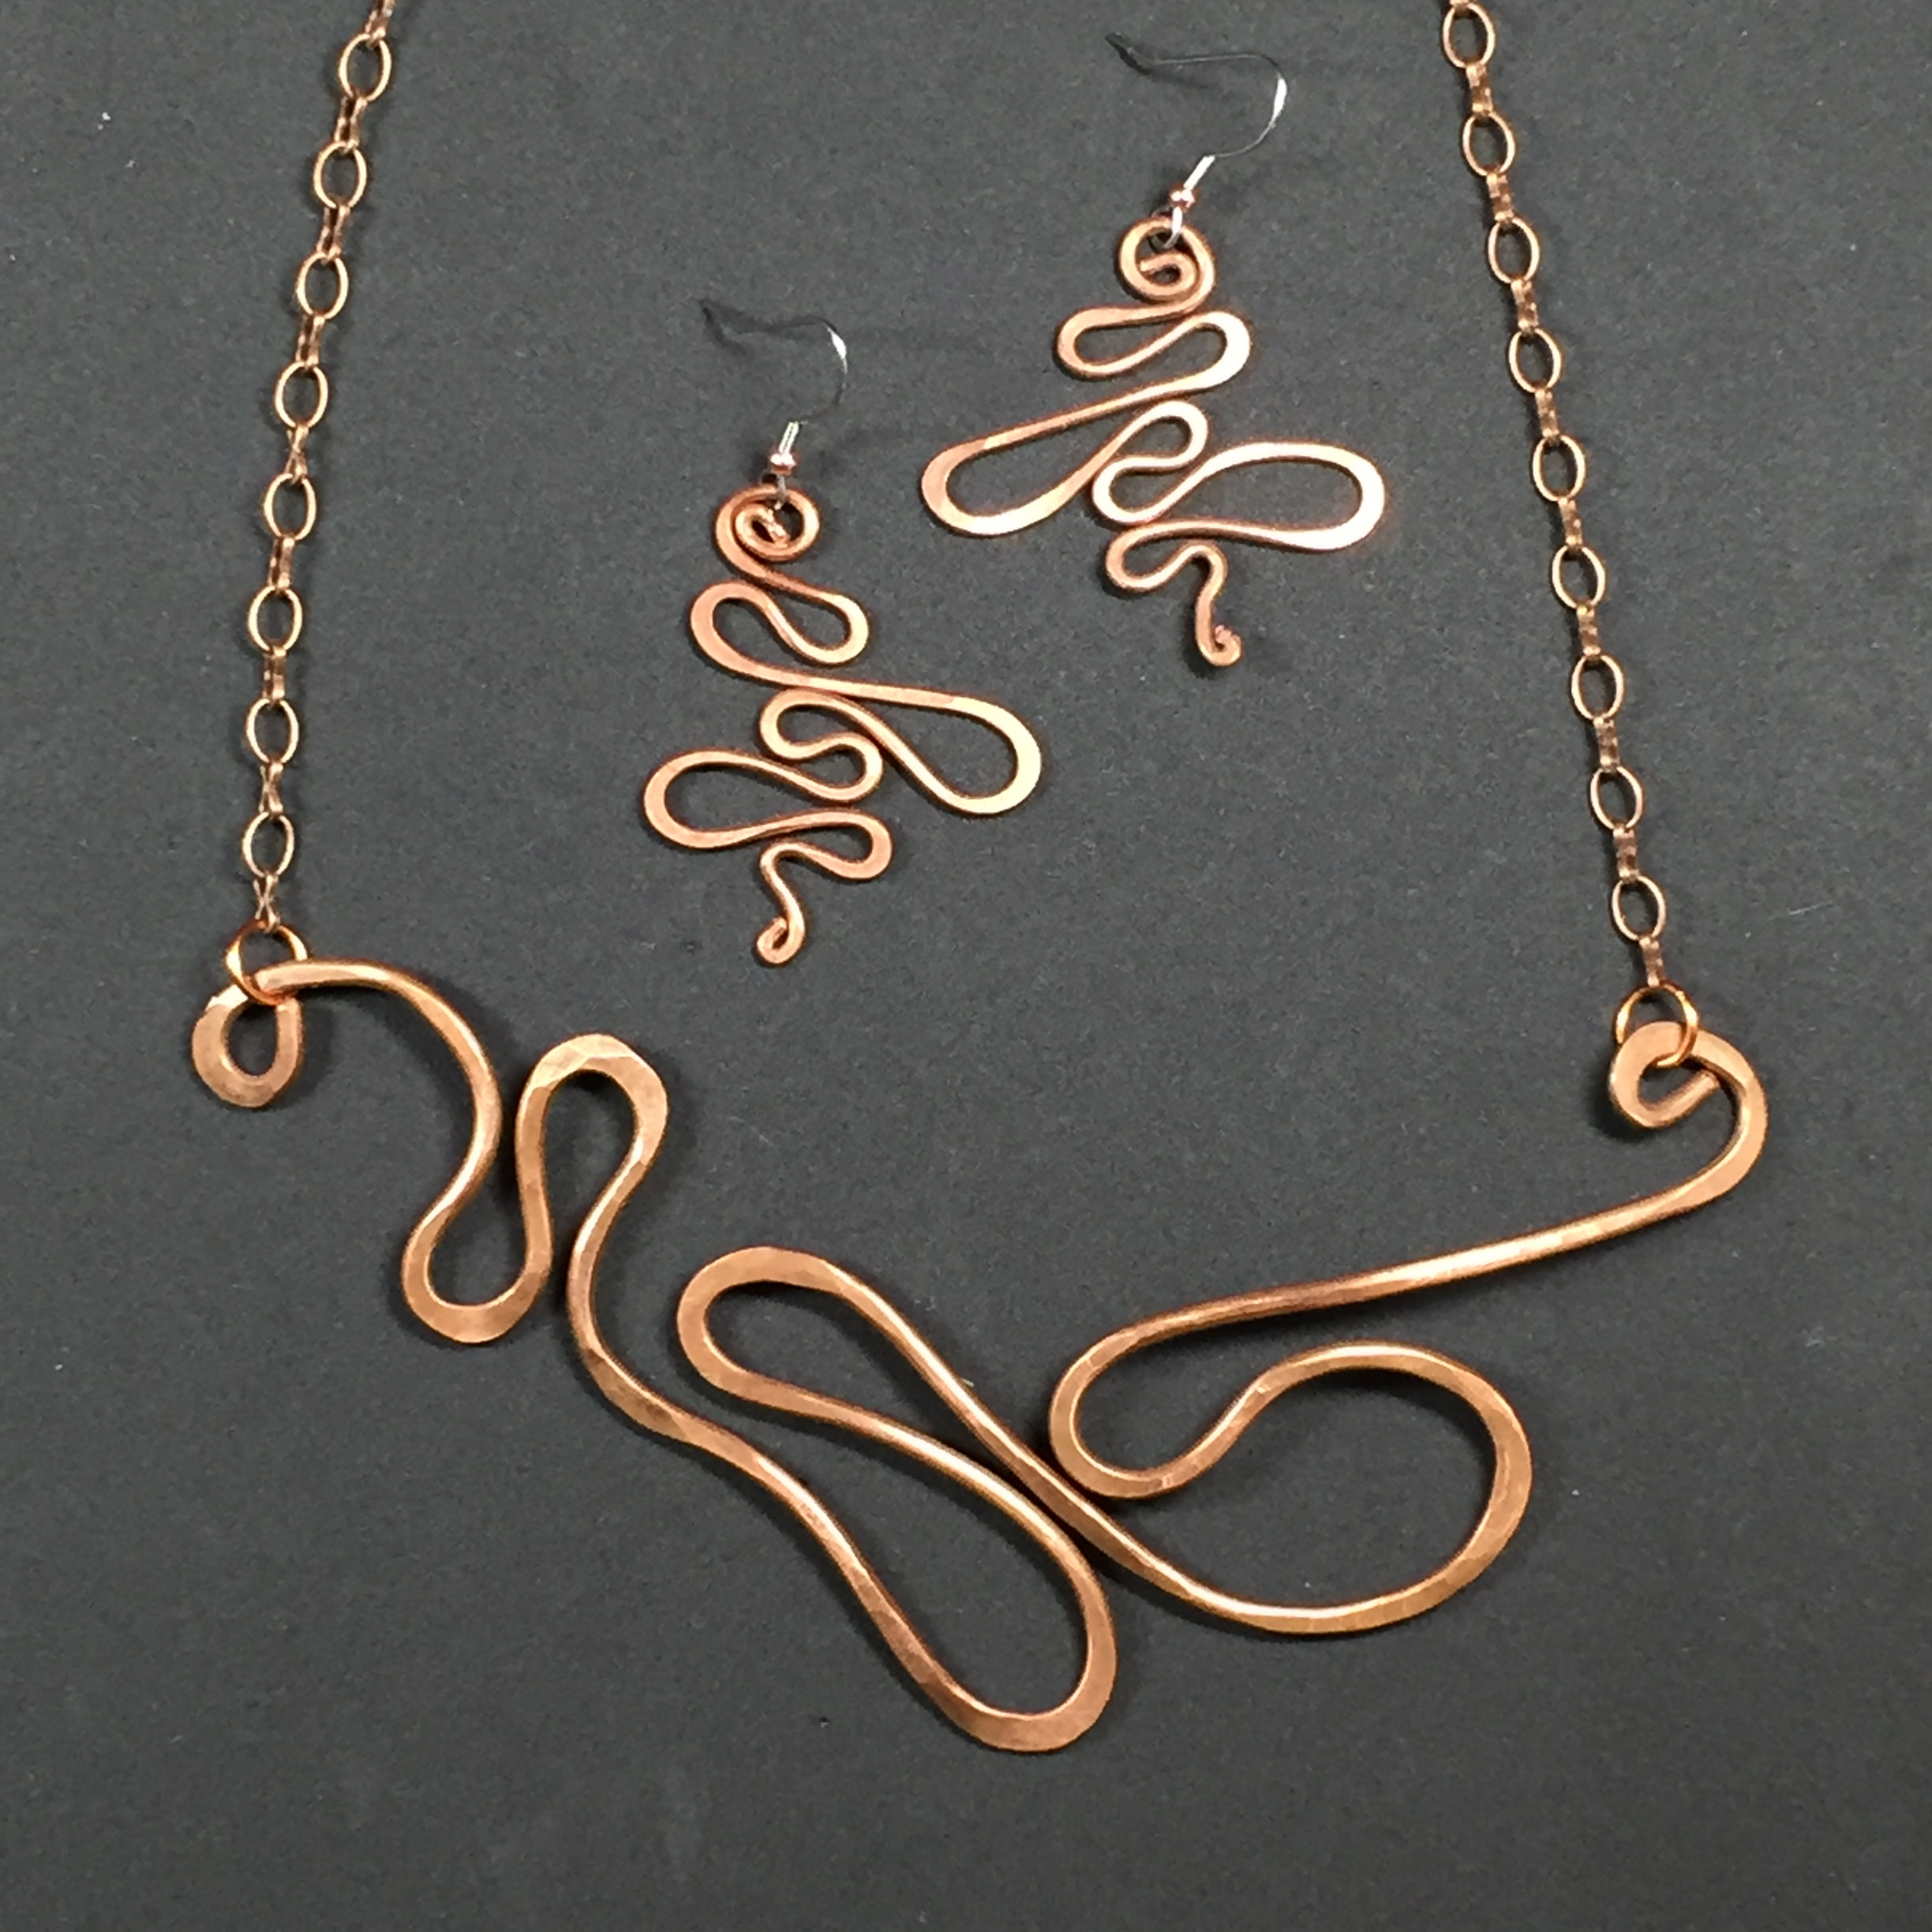 Hand wrought copper necklace and earrings